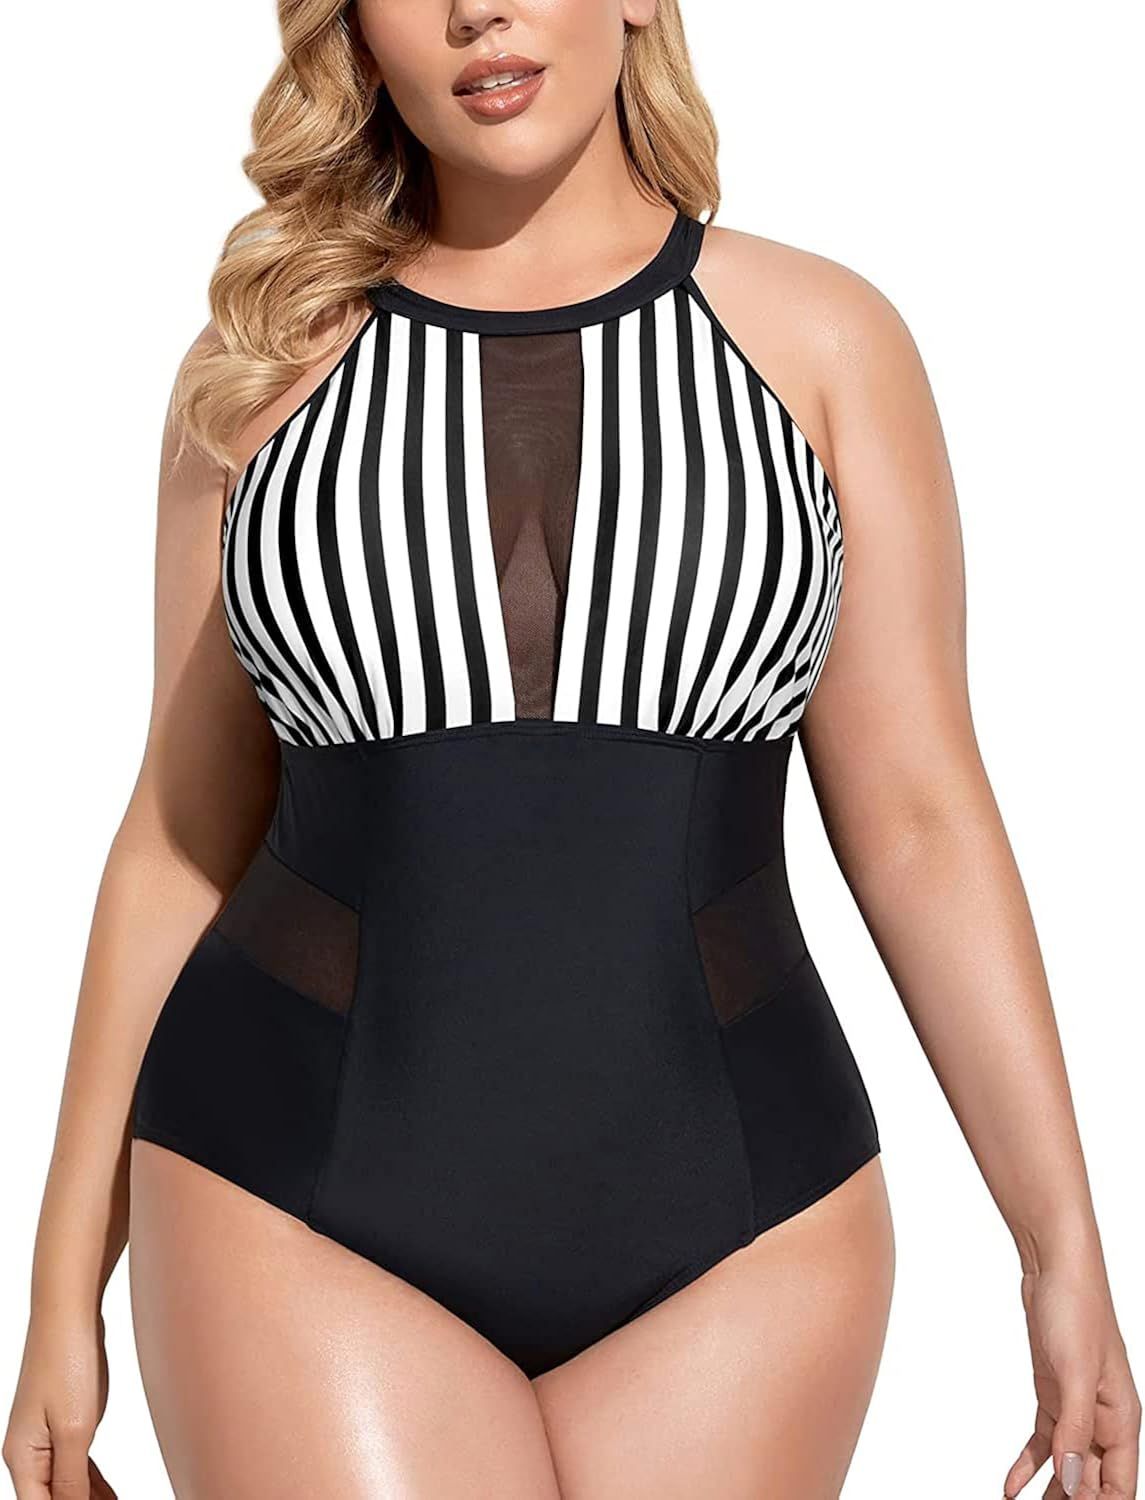 Daci Plus Size One Piece Swimsuit for Women High Neck Plunge Mesh Cut Out Bathing Suits | Amazon (US)